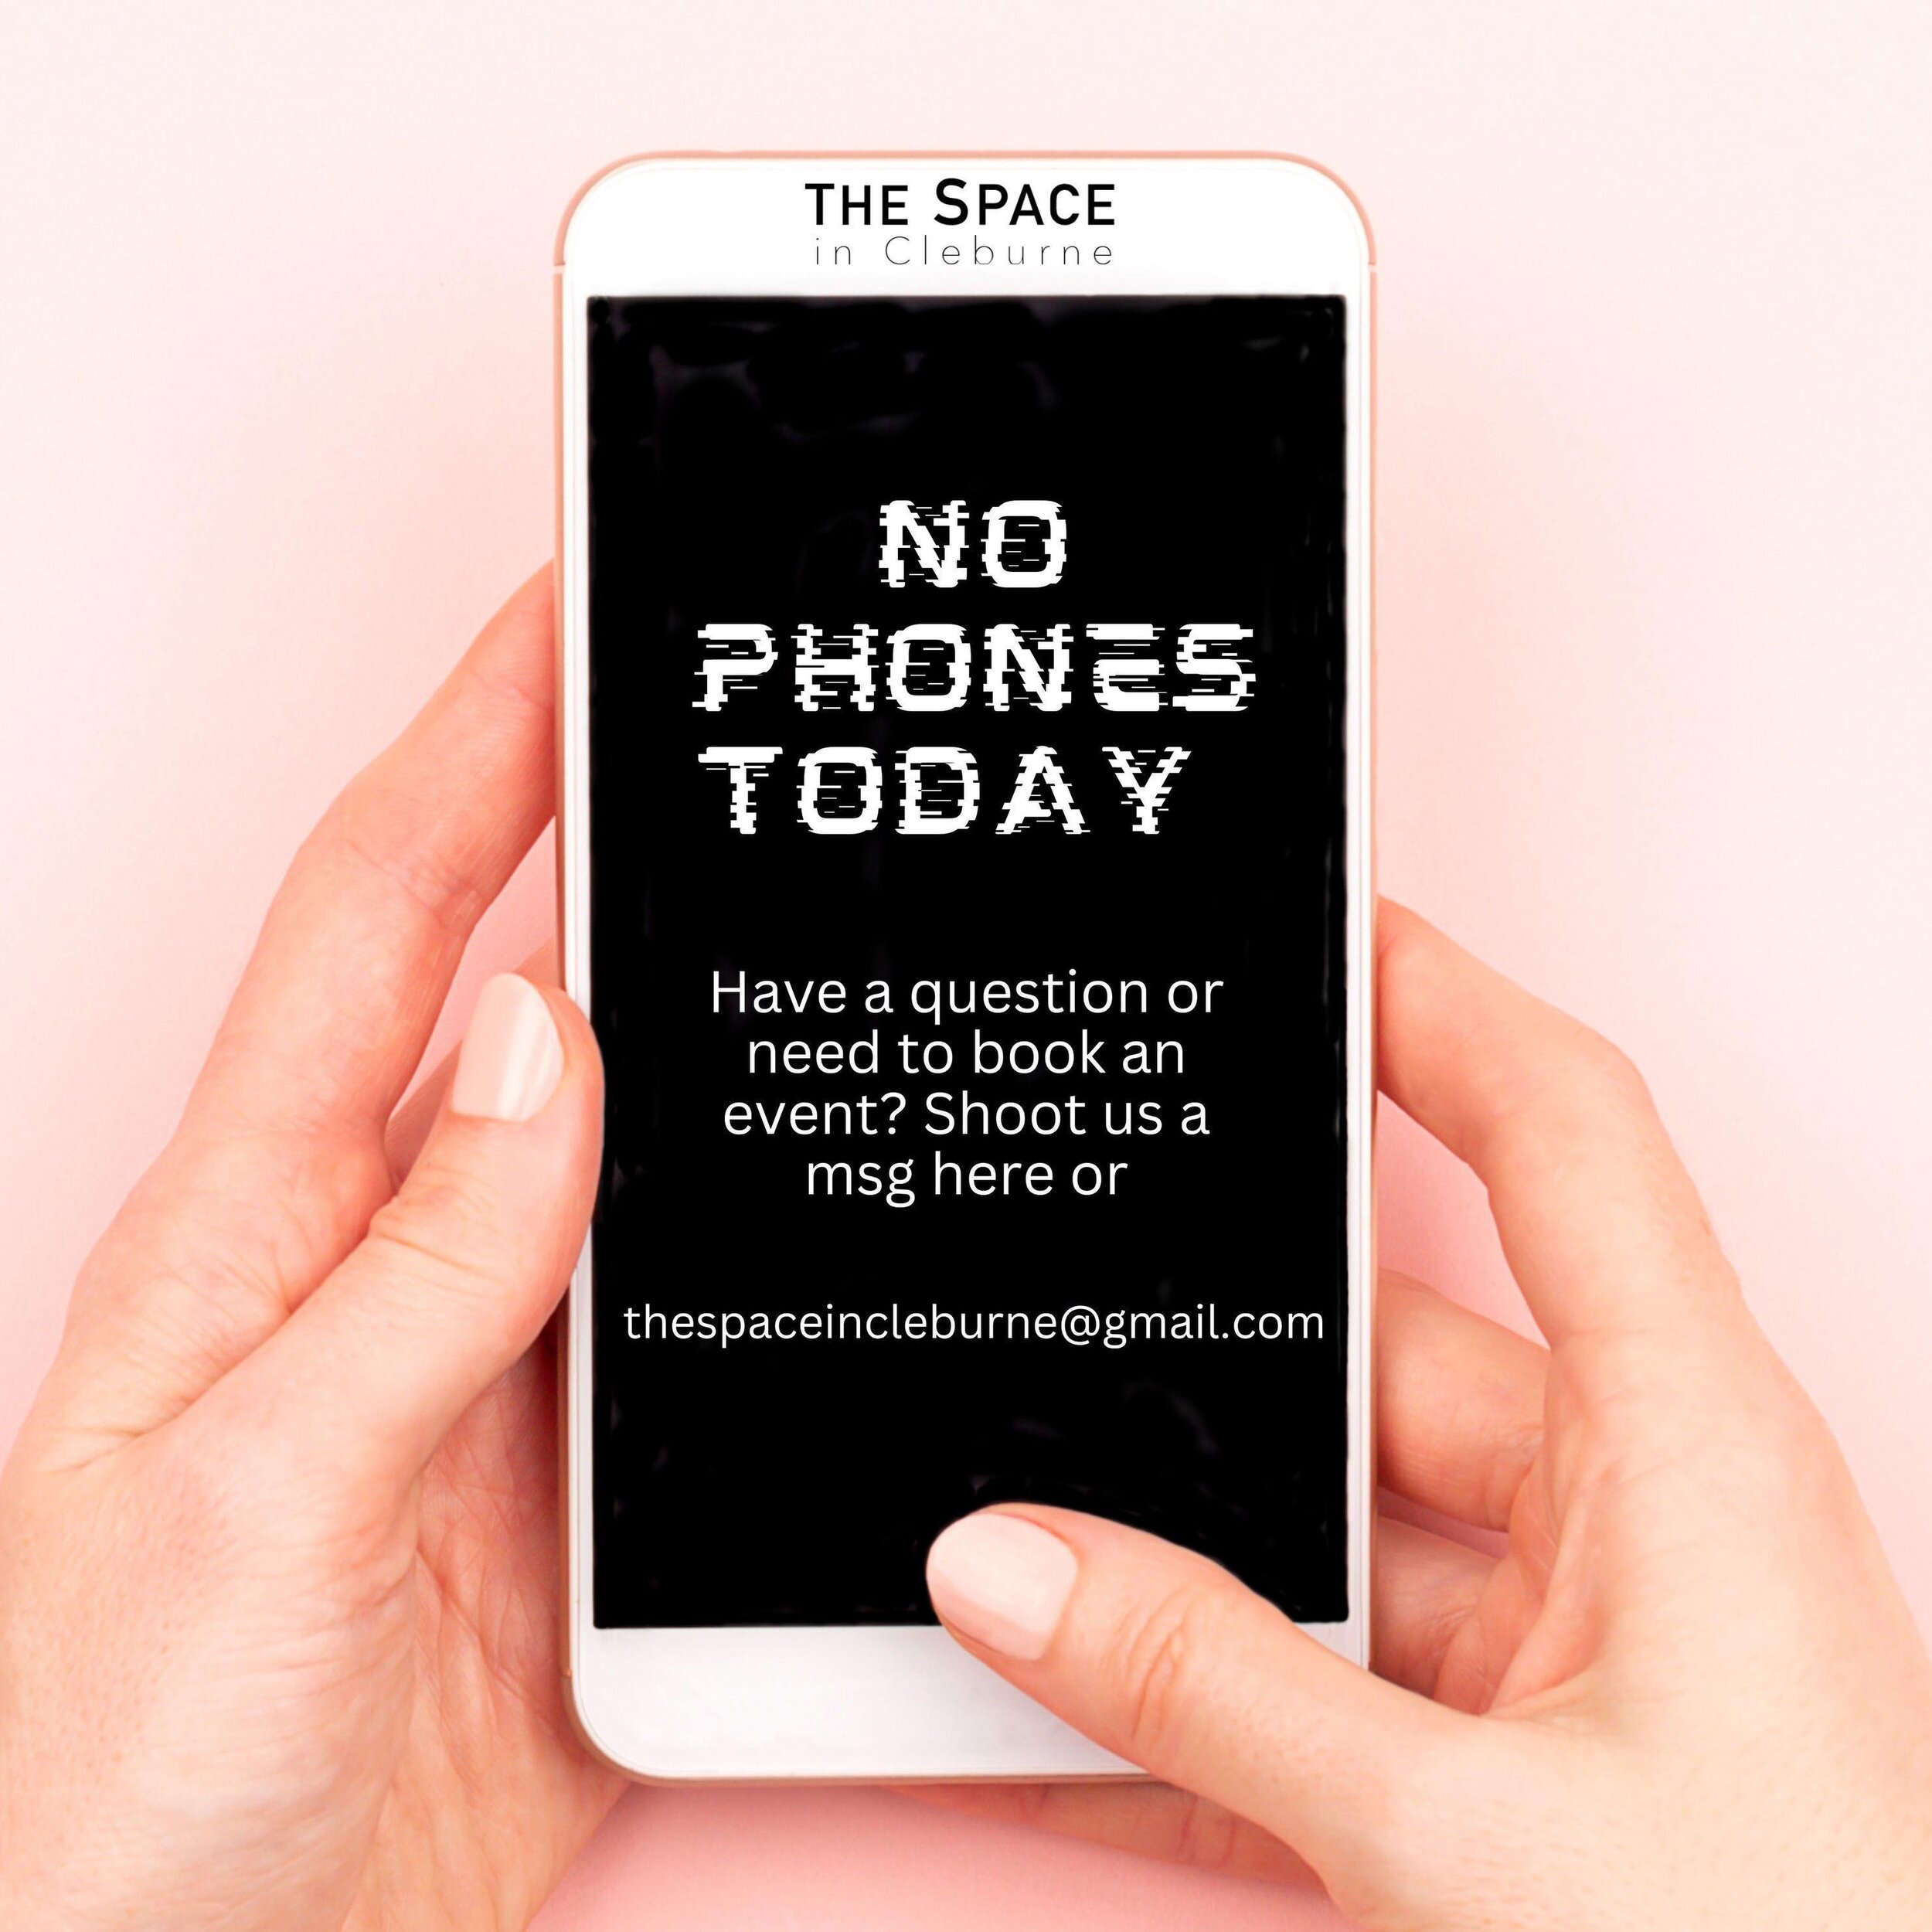 Our phones, like many across the nation, have been off and on today. Please feel free to send us a msg on our social pages or to our email at thespaceincleburne@gmail.com